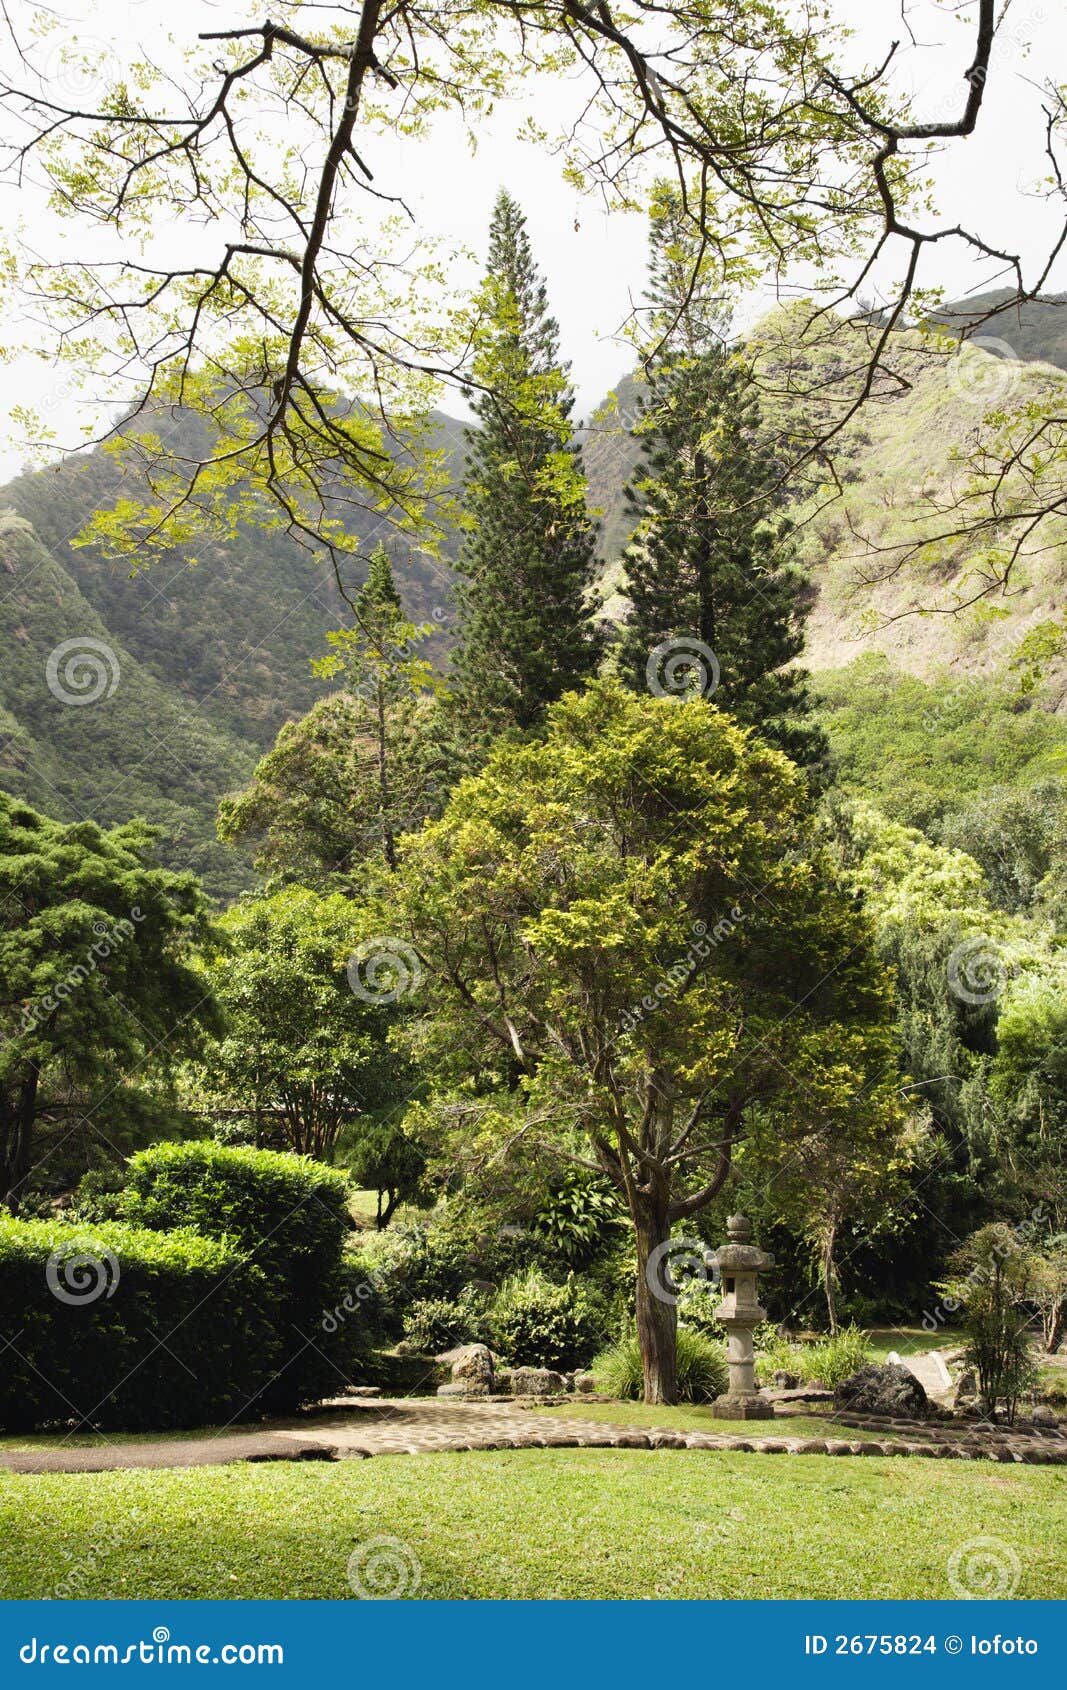 Asian Garden In Park Stock Photo Image Of State Tree 2675824